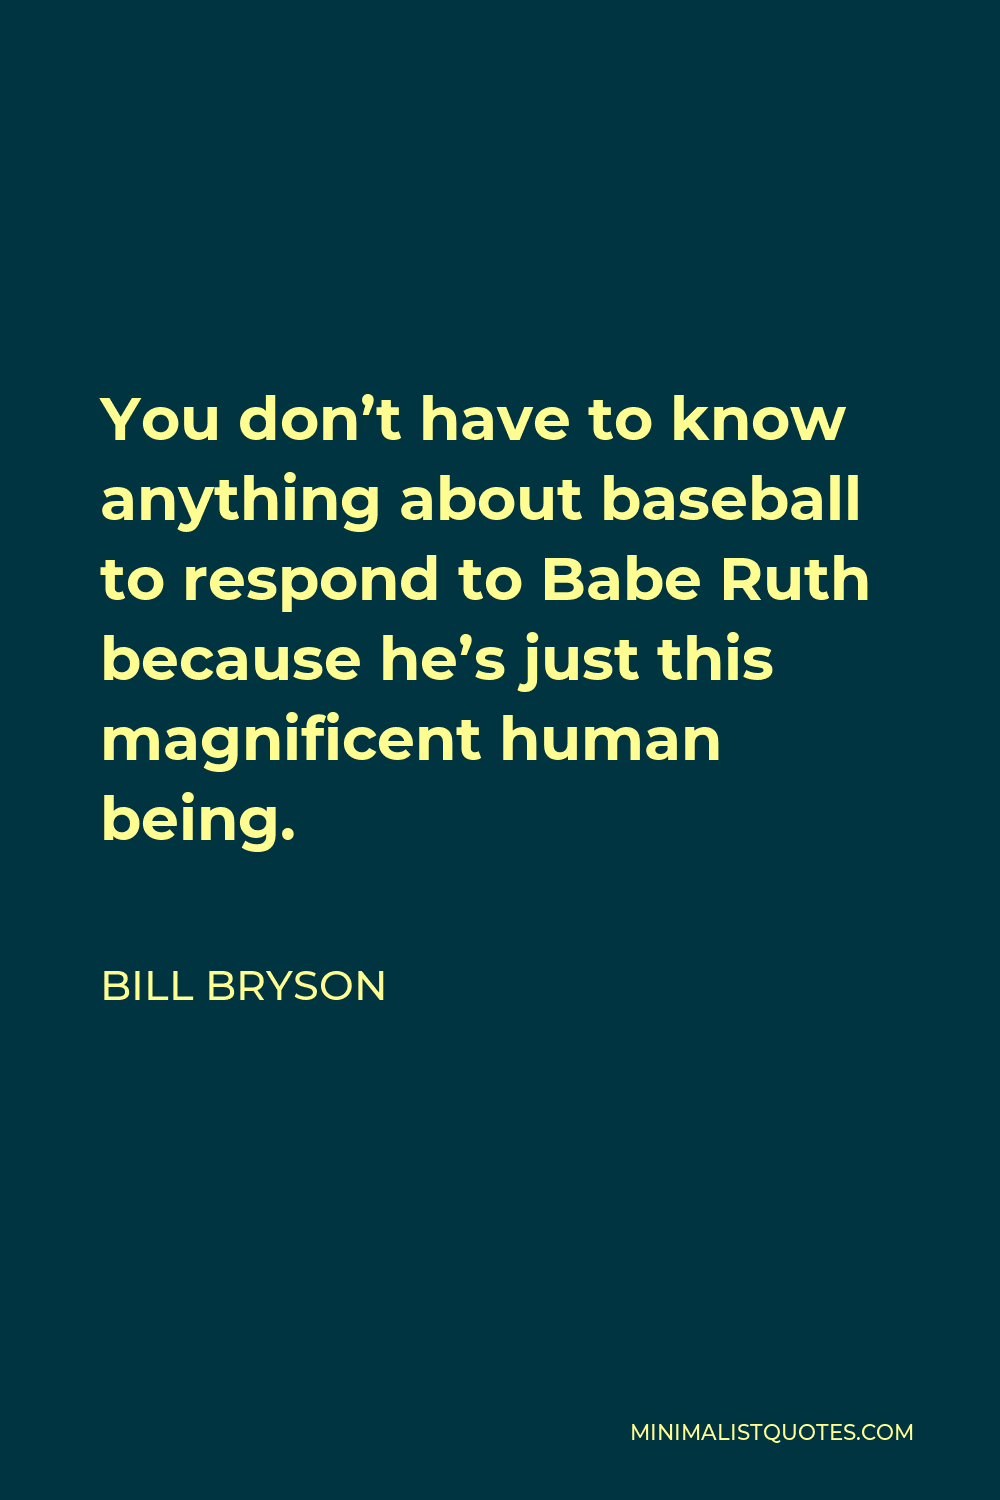 Bill Bryson Quote - You don’t have to know anything about baseball to respond to Babe Ruth because he’s just this magnificent human being.